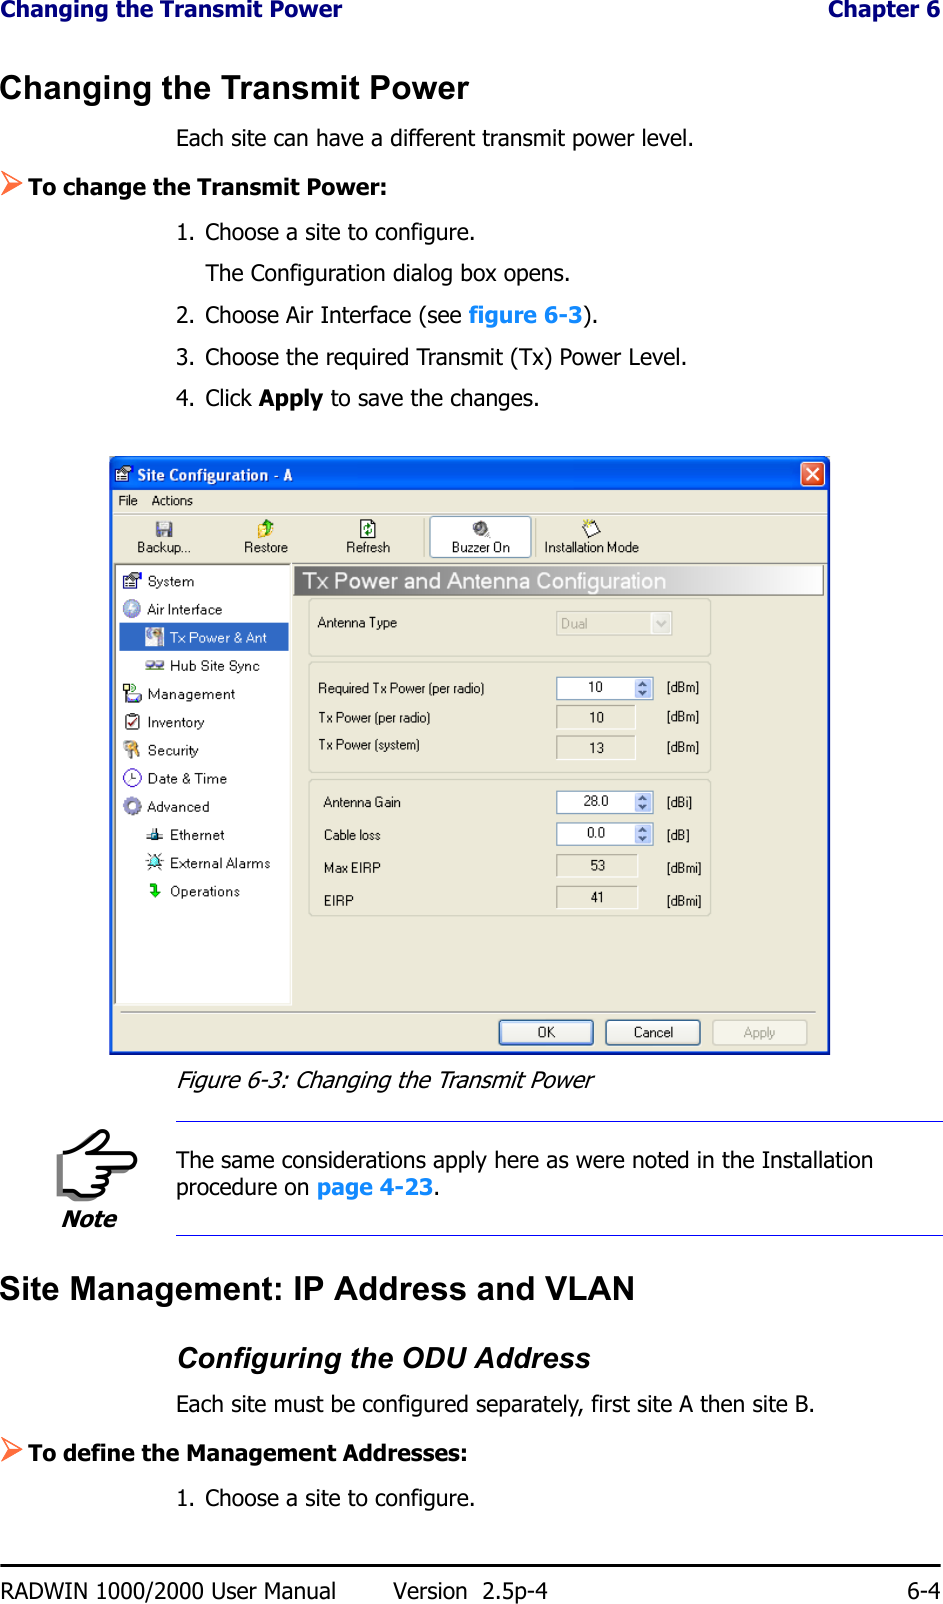 Changing the Transmit Power  Chapter 6RADWIN 1000/2000 User Manual Version  2.5p-4 6-4Changing the Transmit PowerEach site can have a different transmit power level. ¾To change the Transmit Power:1. Choose a site to configure.The Configuration dialog box opens.2. Choose Air Interface (see figure 6-3).3. Choose the required Transmit (Tx) Power Level.4. Click Apply to save the changes.Figure 6-3: Changing the Transmit PowerSite Management: IP Address and VLANConfiguring the ODU AddressEach site must be configured separately, first site A then site B.¾To define the Management Addresses:1. Choose a site to configure.NoteThe same considerations apply here as were noted in the Installation procedure on page 4-23.